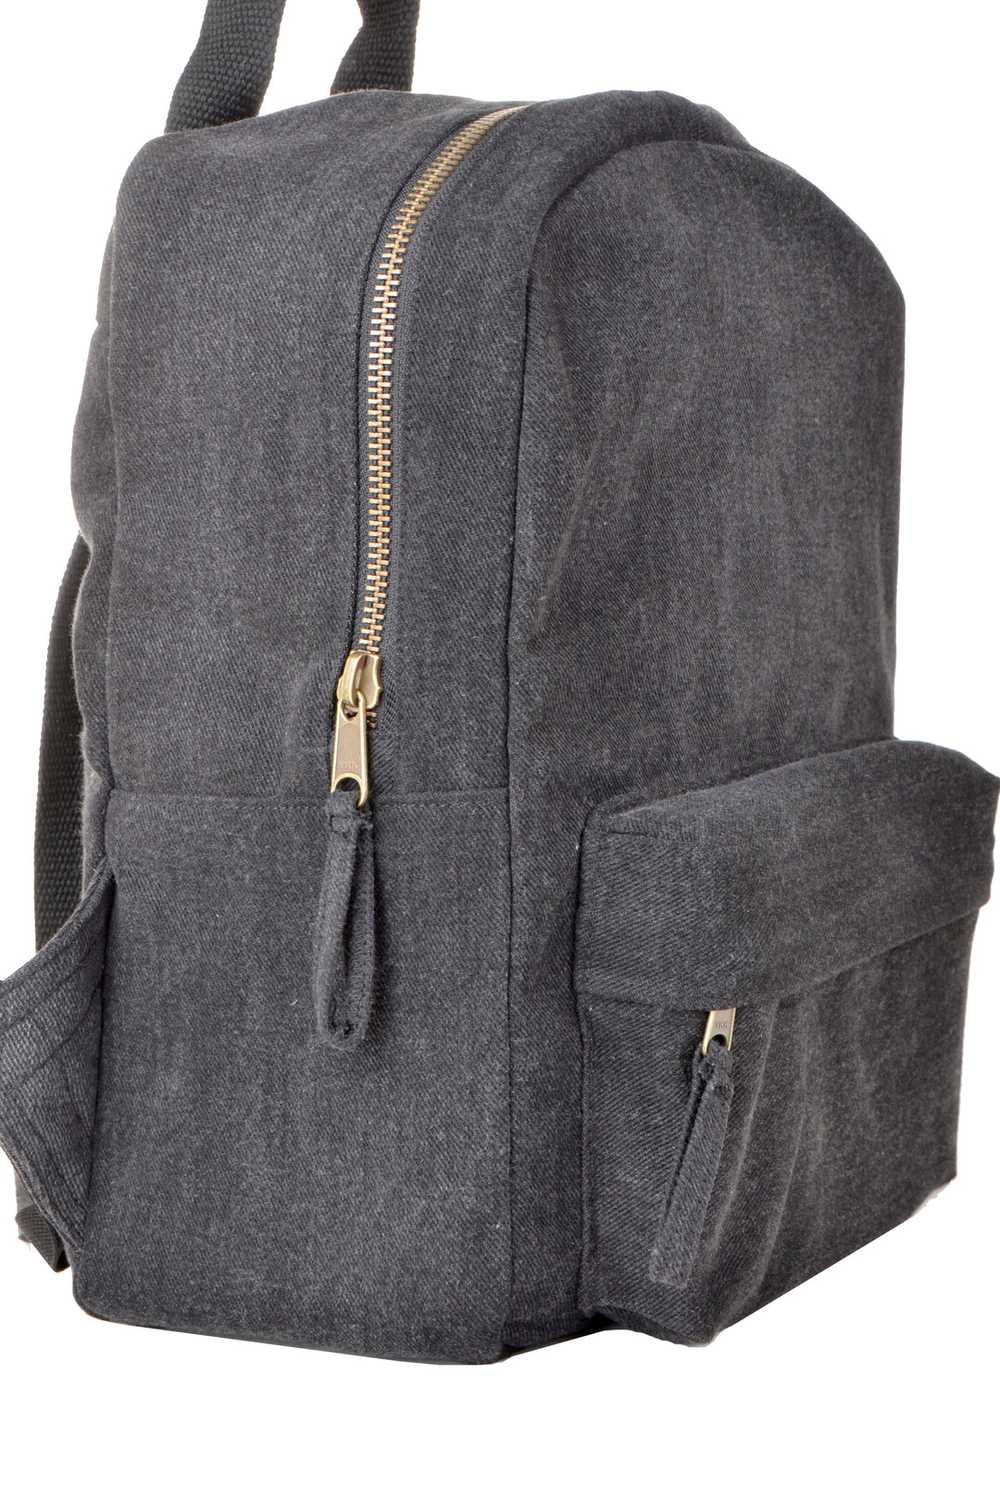 Label Jamie Sporty Dome Backpack - image 4